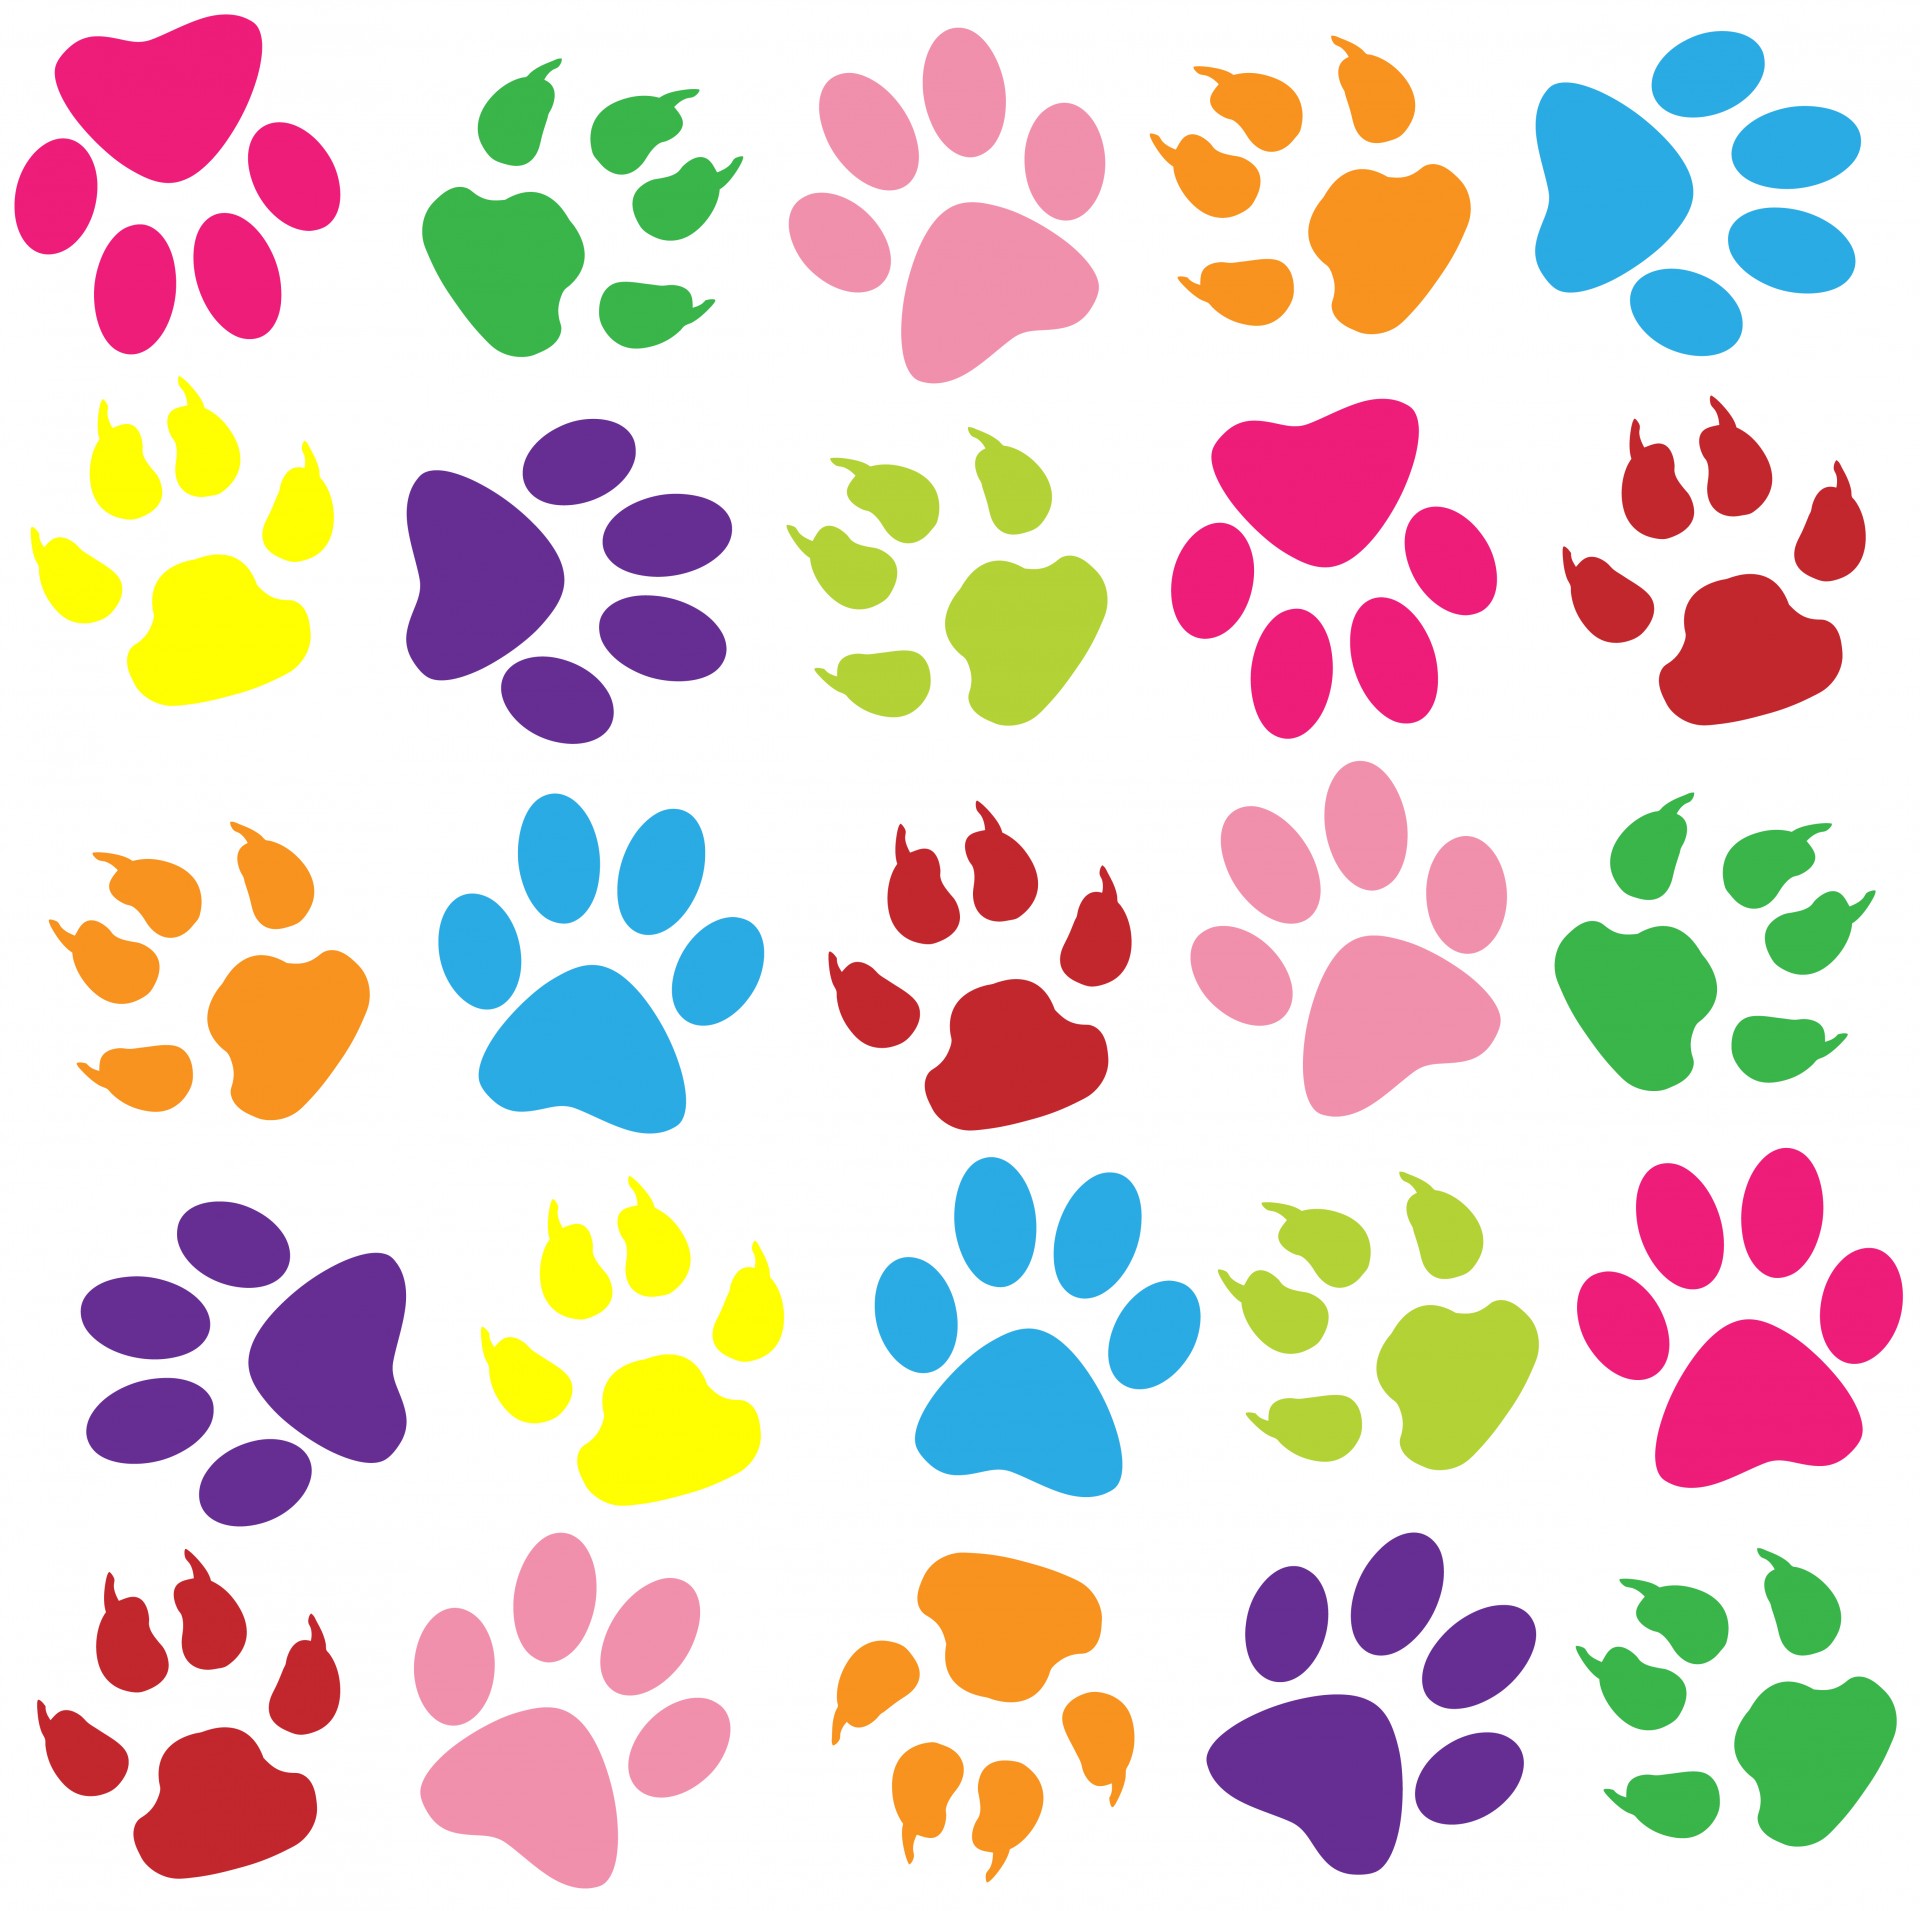 Animal paw prints colorful wallpaper background for scrapbooking